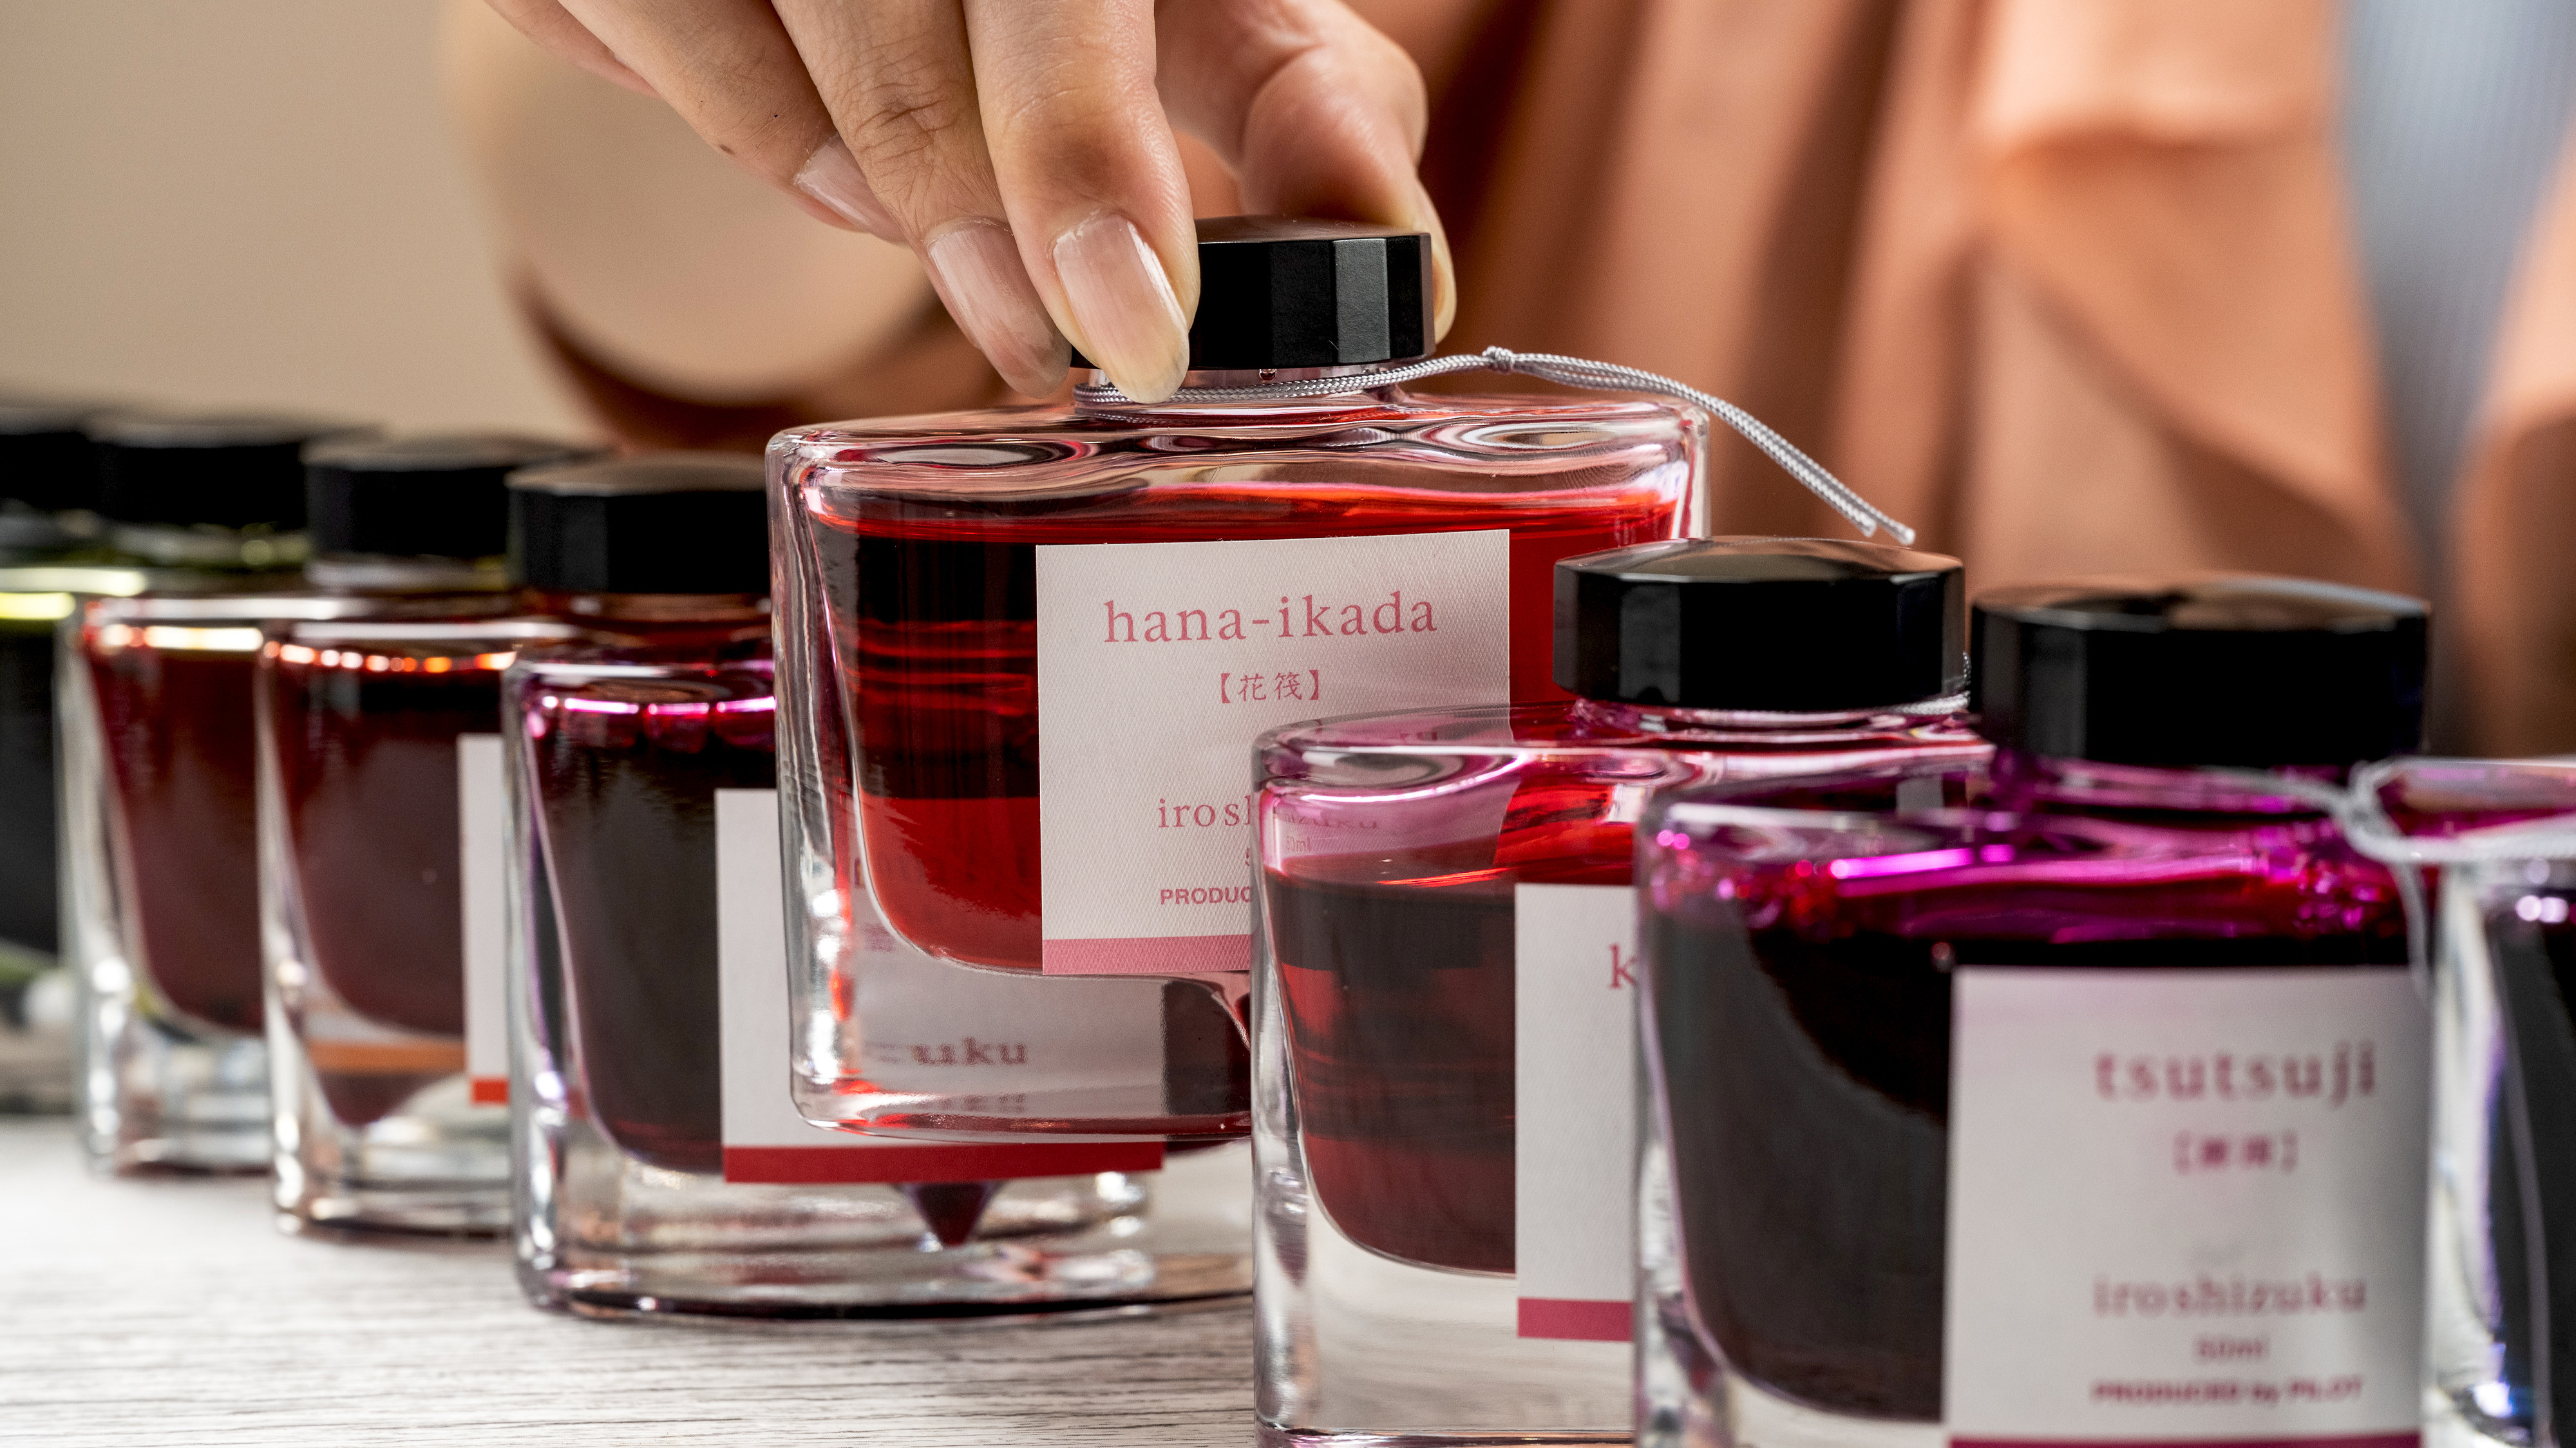 Close up on a woman's hand selecting the hana-ikada shade from a section of iroshizuku Fountain Pen Ink Bottle.